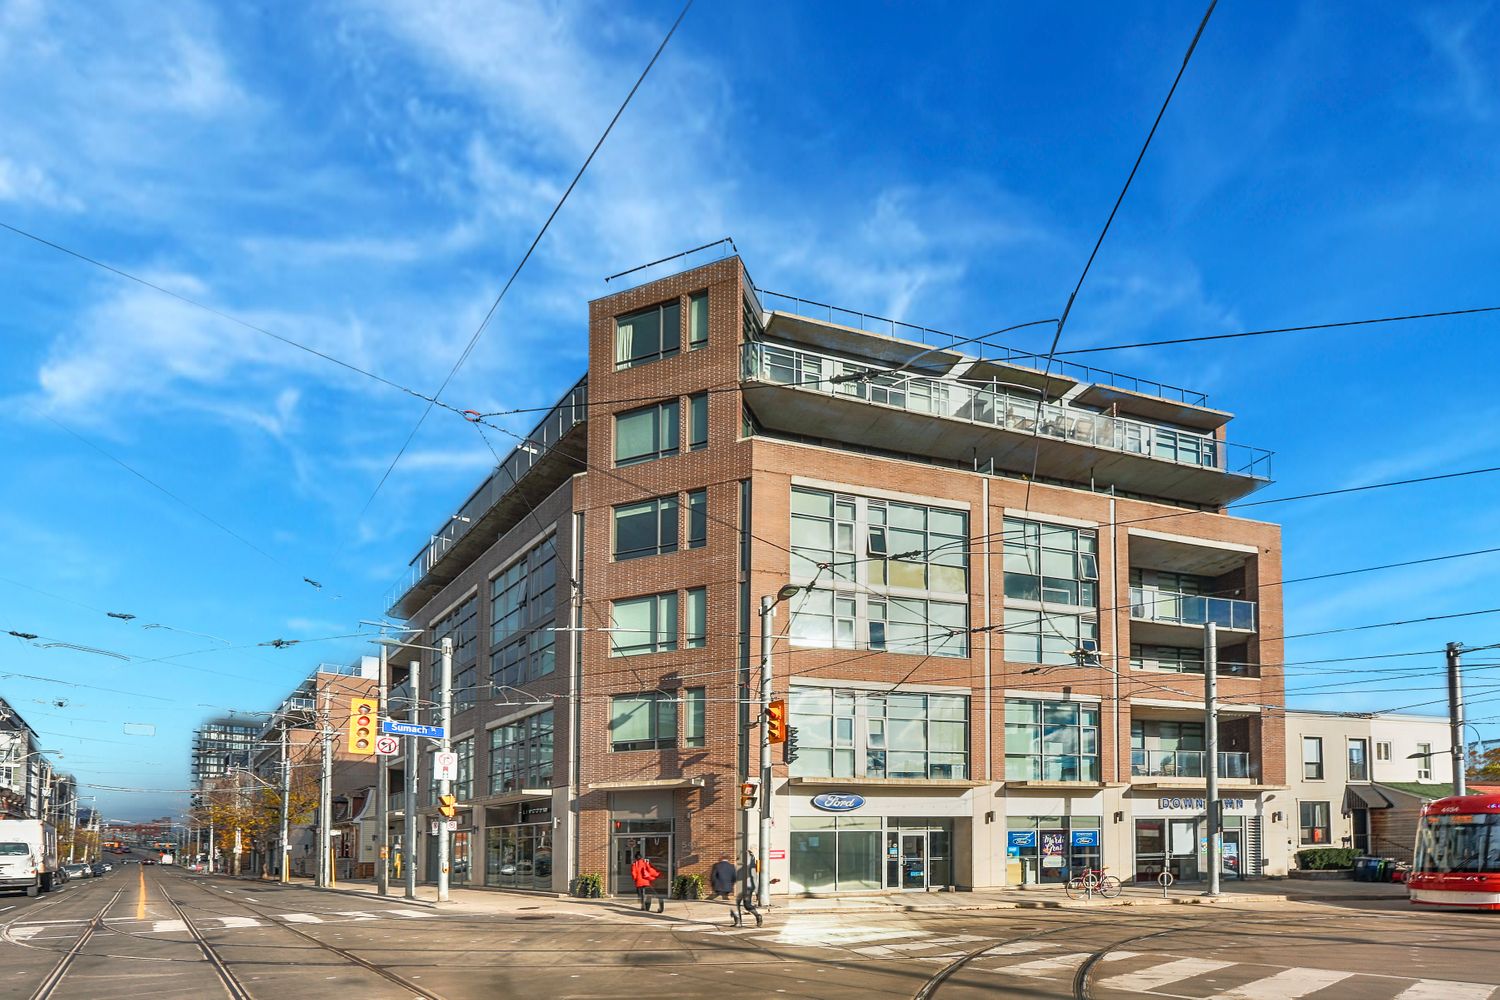 549 King Street E. Corktown District I Lofts is located in  Downtown, Toronto - image #1 of 8